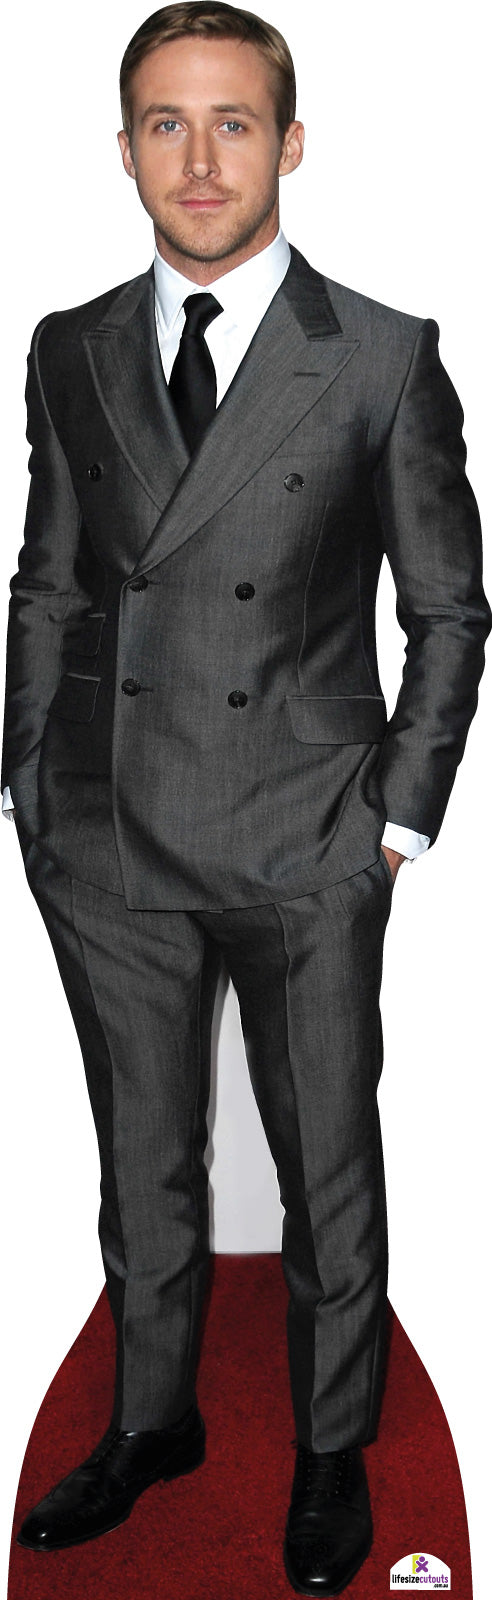 Ryan Gosling in Double Breasted Suit Cardboard Cutout 887